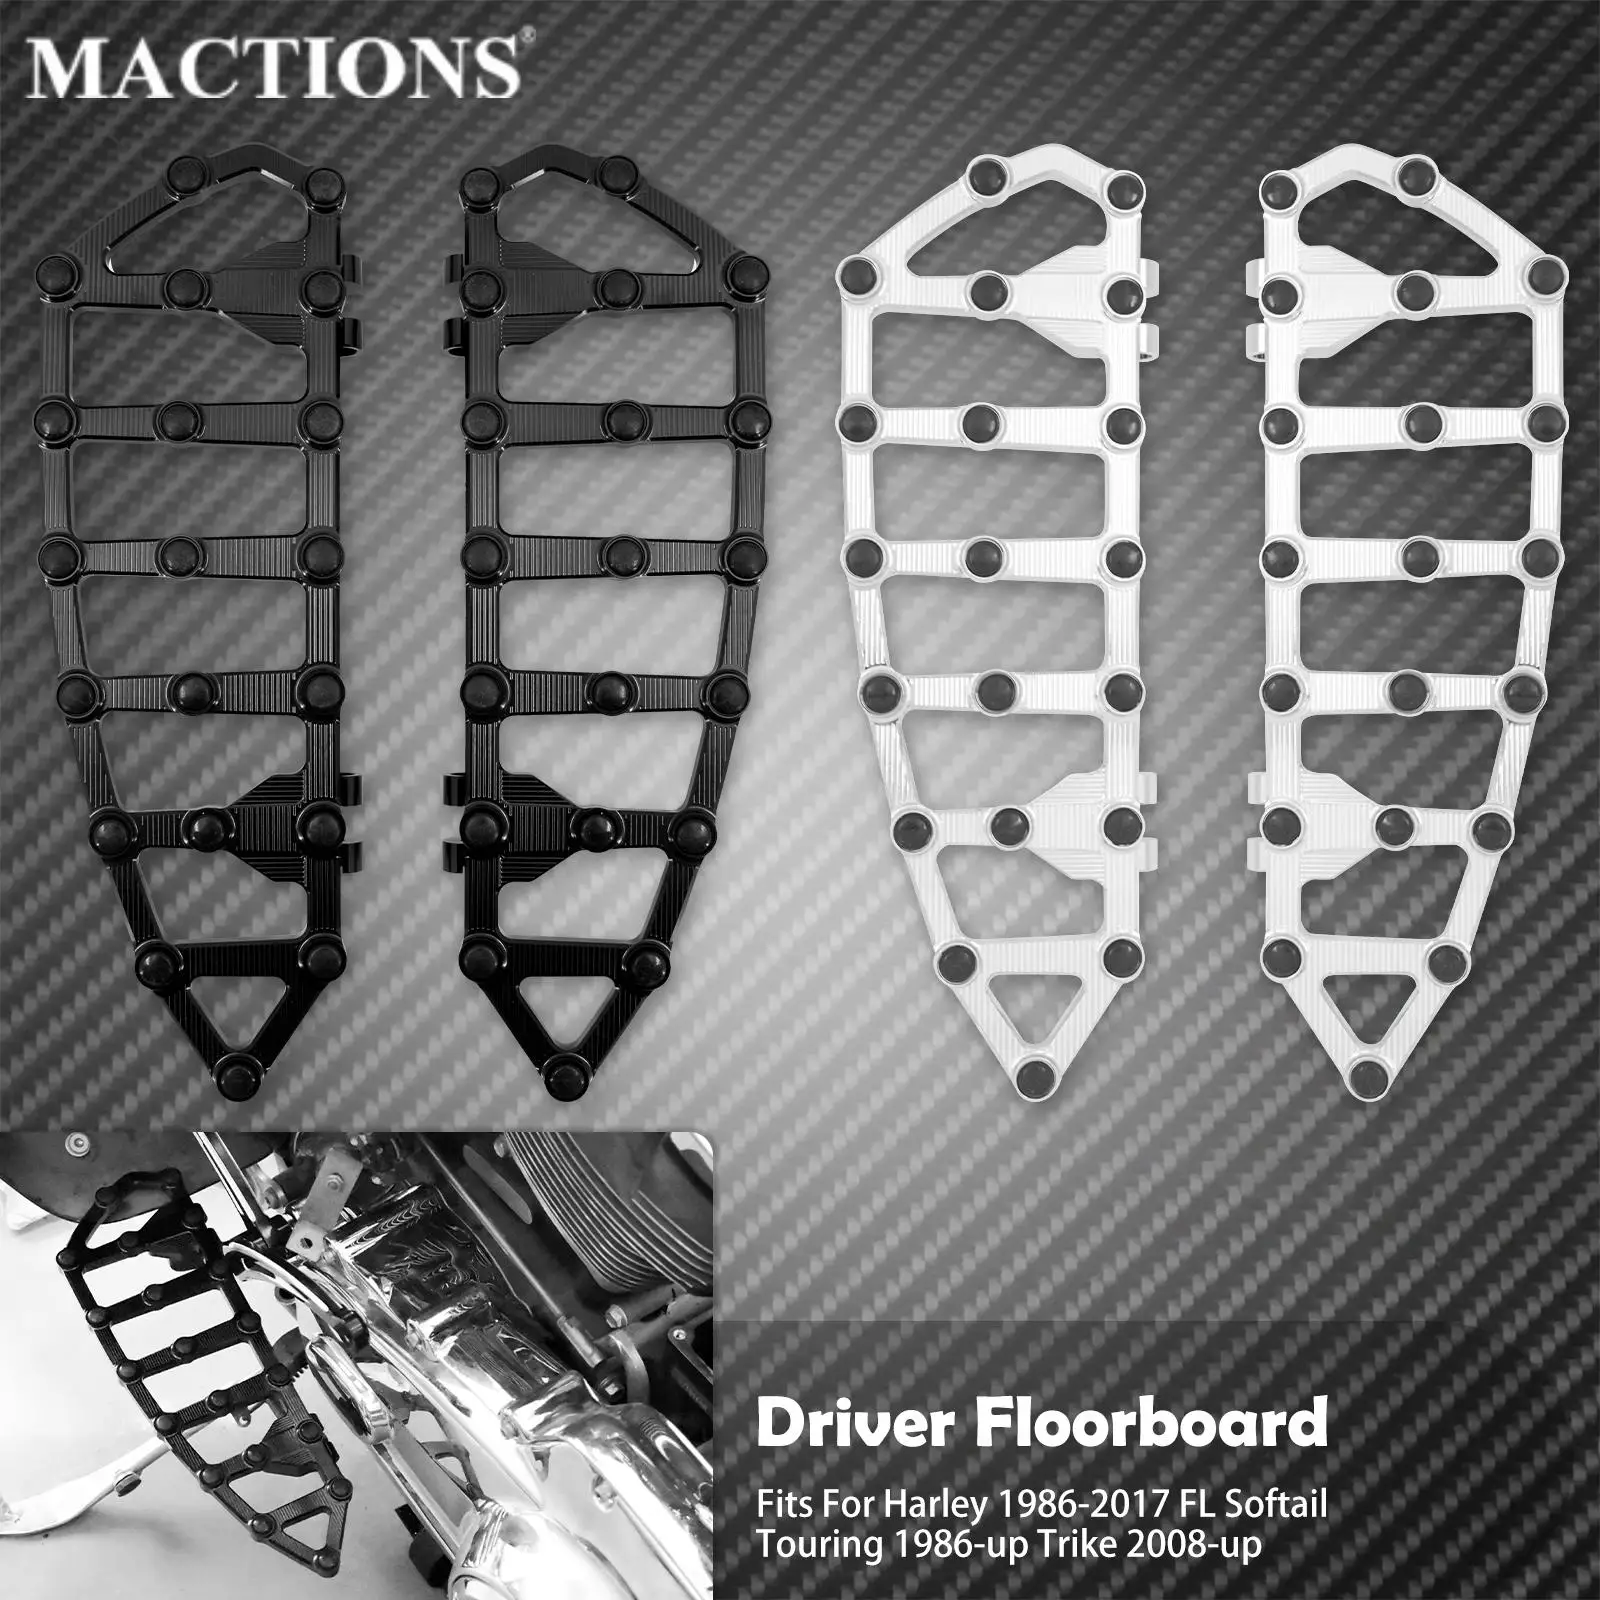 

Motorcycle 2PCS Front Footpegs Pedal Driver Rider Floorboard For Harley Softail FL 86-2017 Touring Street Road Glide FLHR Trike